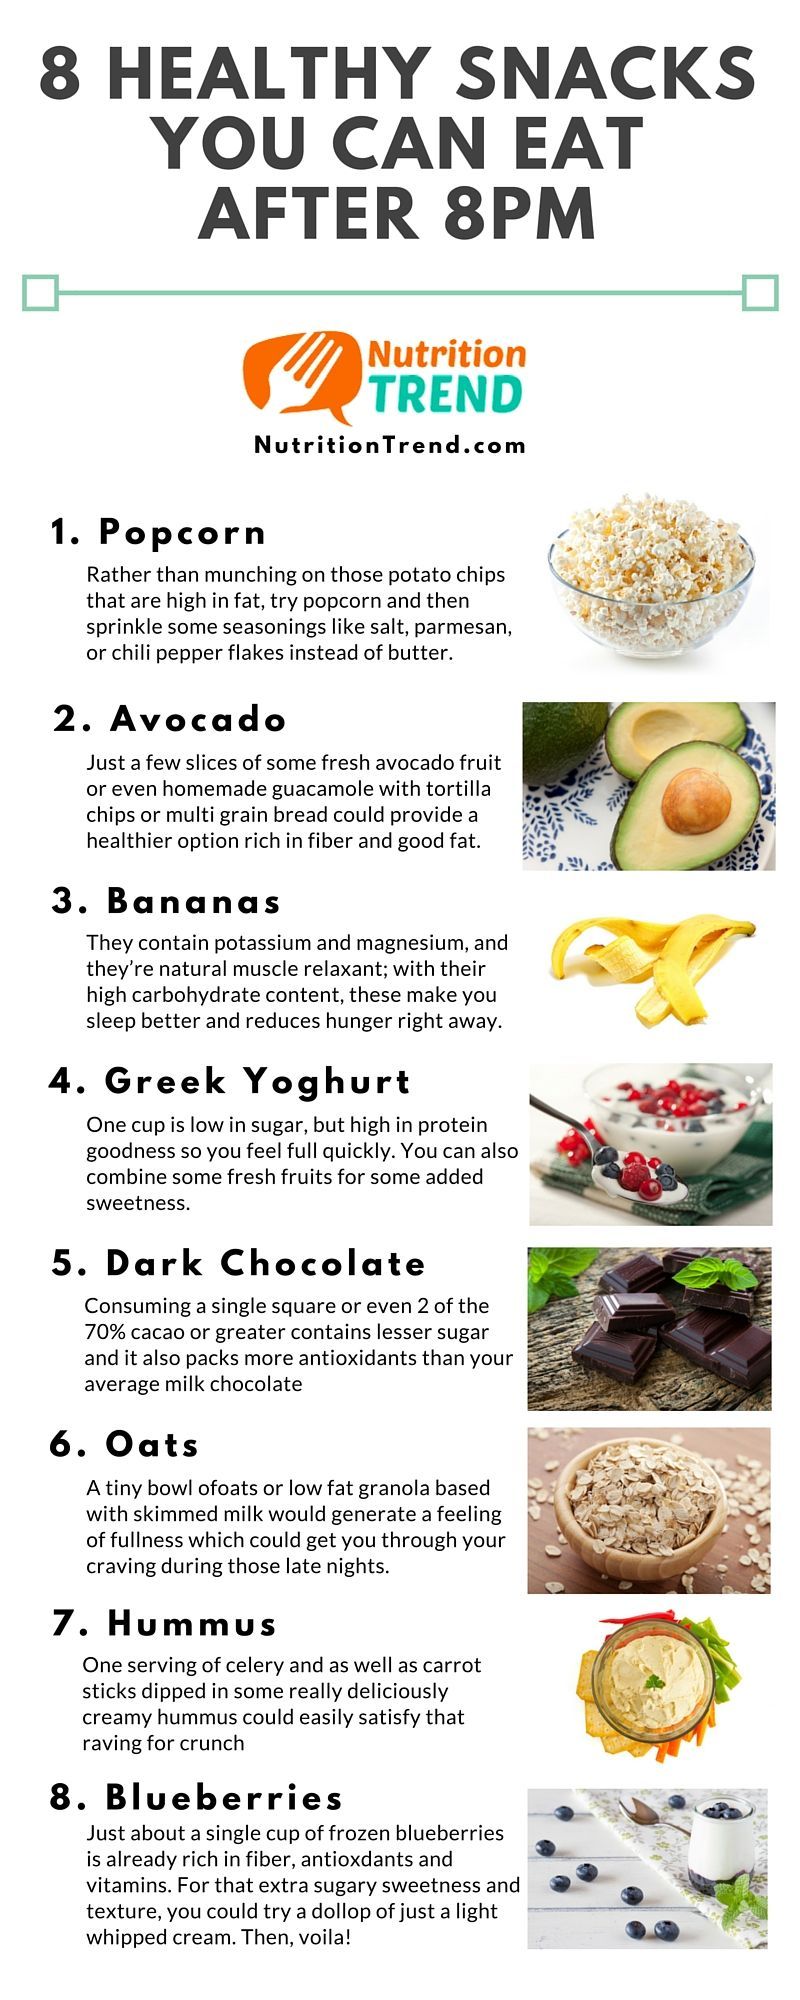 8 Quick, Healthy Late Night Snacks That Won’t Go Straight to Your Hips! #Arbonne